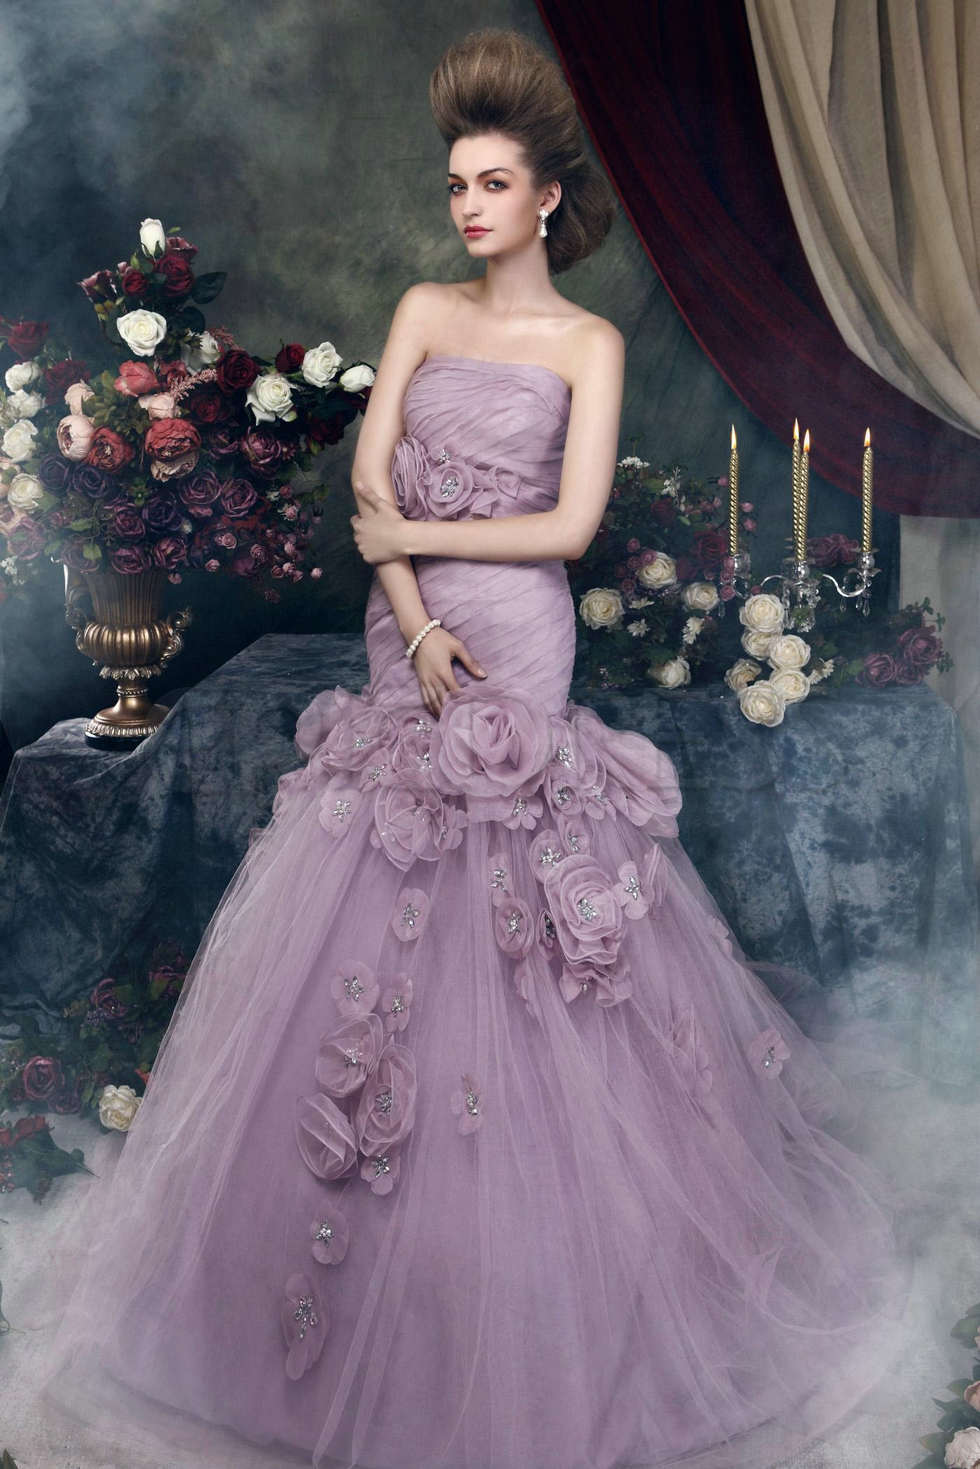 So Charming on a Purple Wedding  Gown  vivanspace